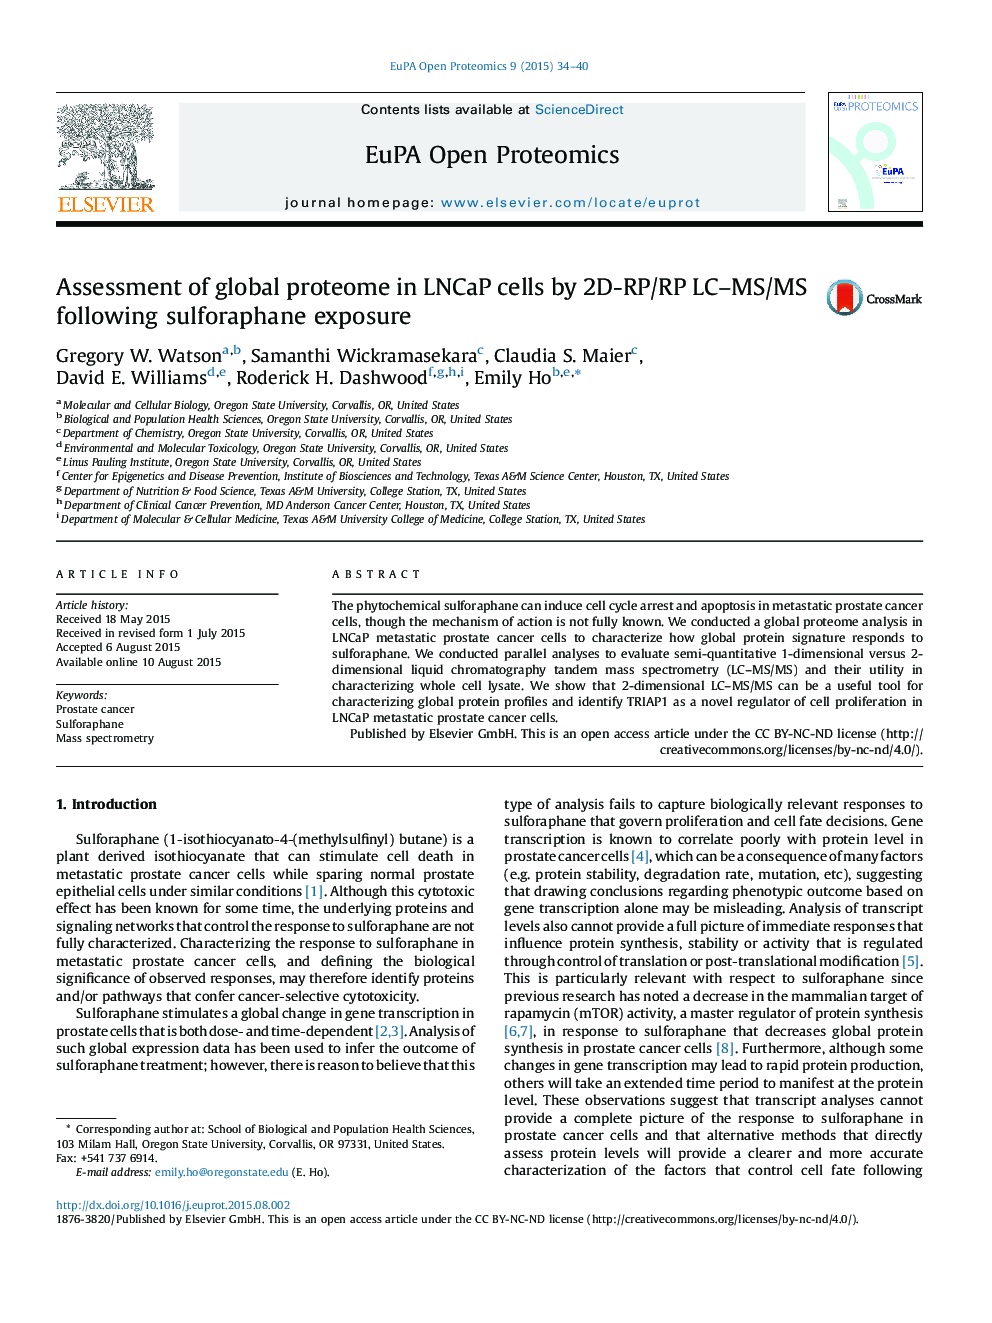 Assessment of global proteome in LNCaP cells by 2D-RP/RP LC–MS/MS following sulforaphane exposure